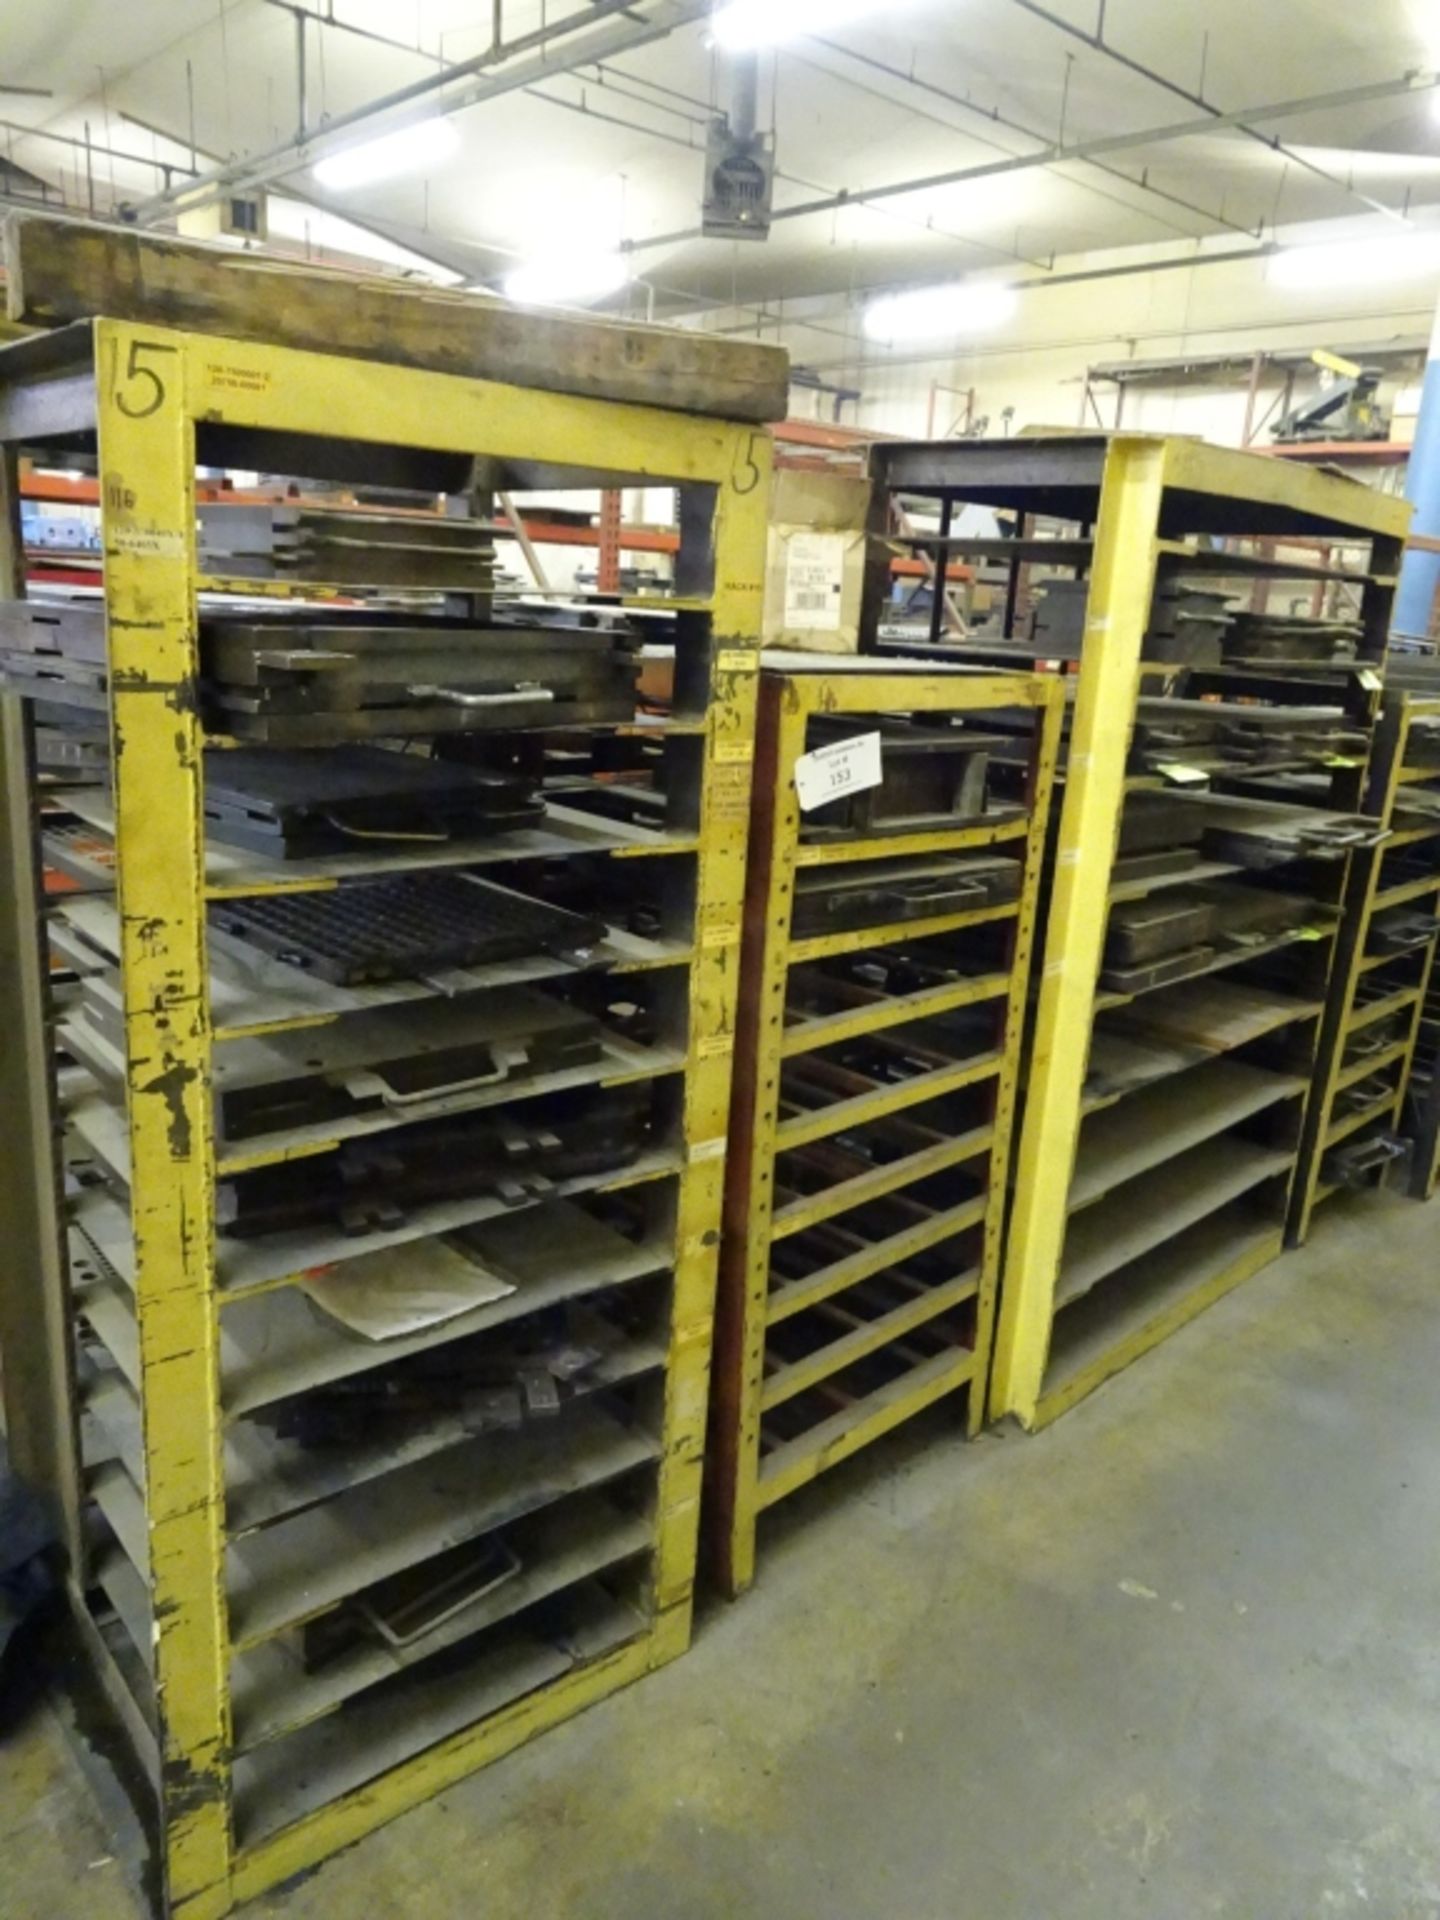 (15) Various Sized Heavy Duty Steel Mold Racks With No Contents - Image 3 of 5